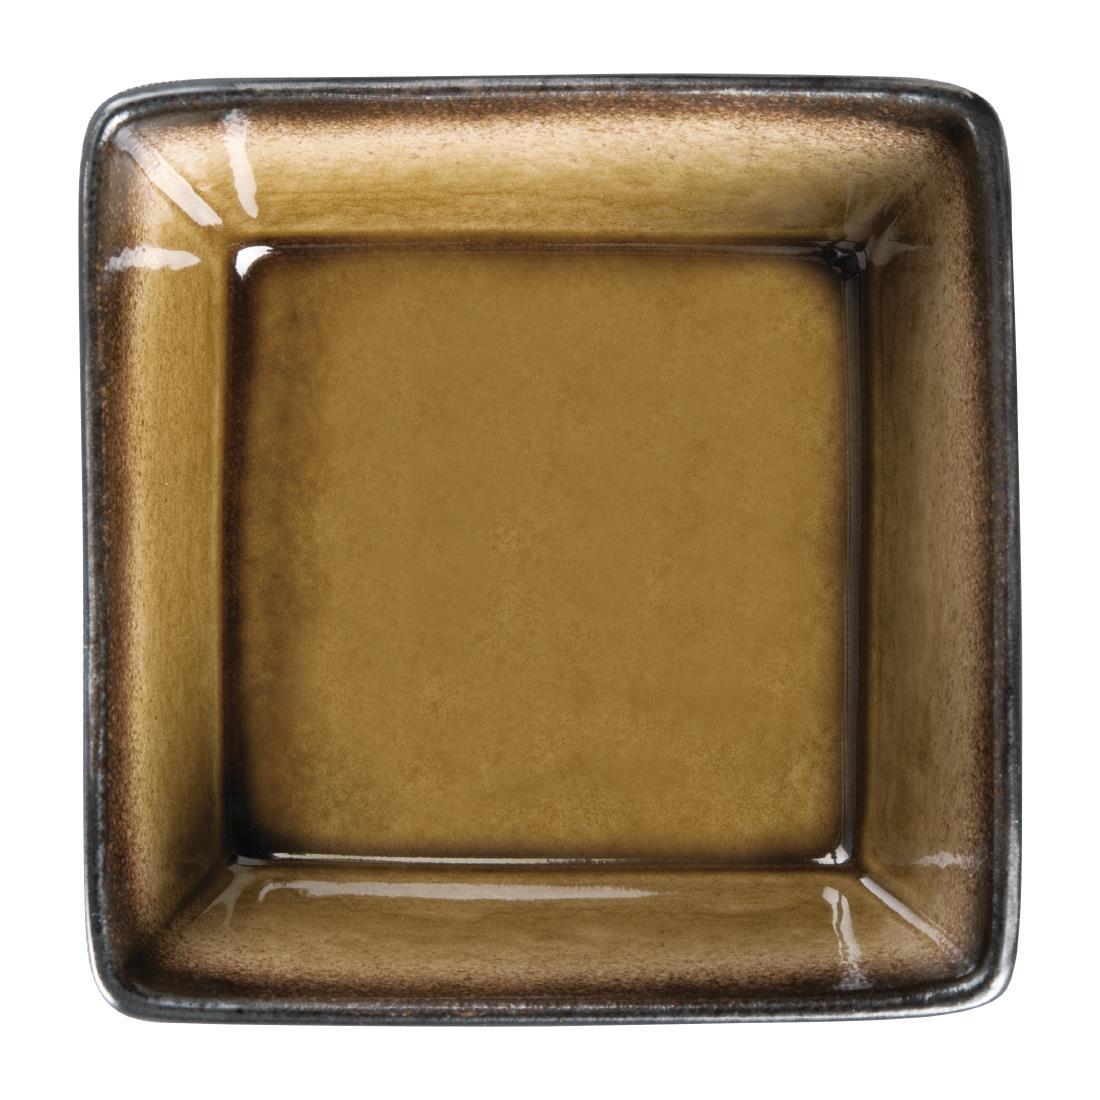 Olympia Nomi Square Bowl Yellow 110mm (Pack of 6) - HC537  - 1